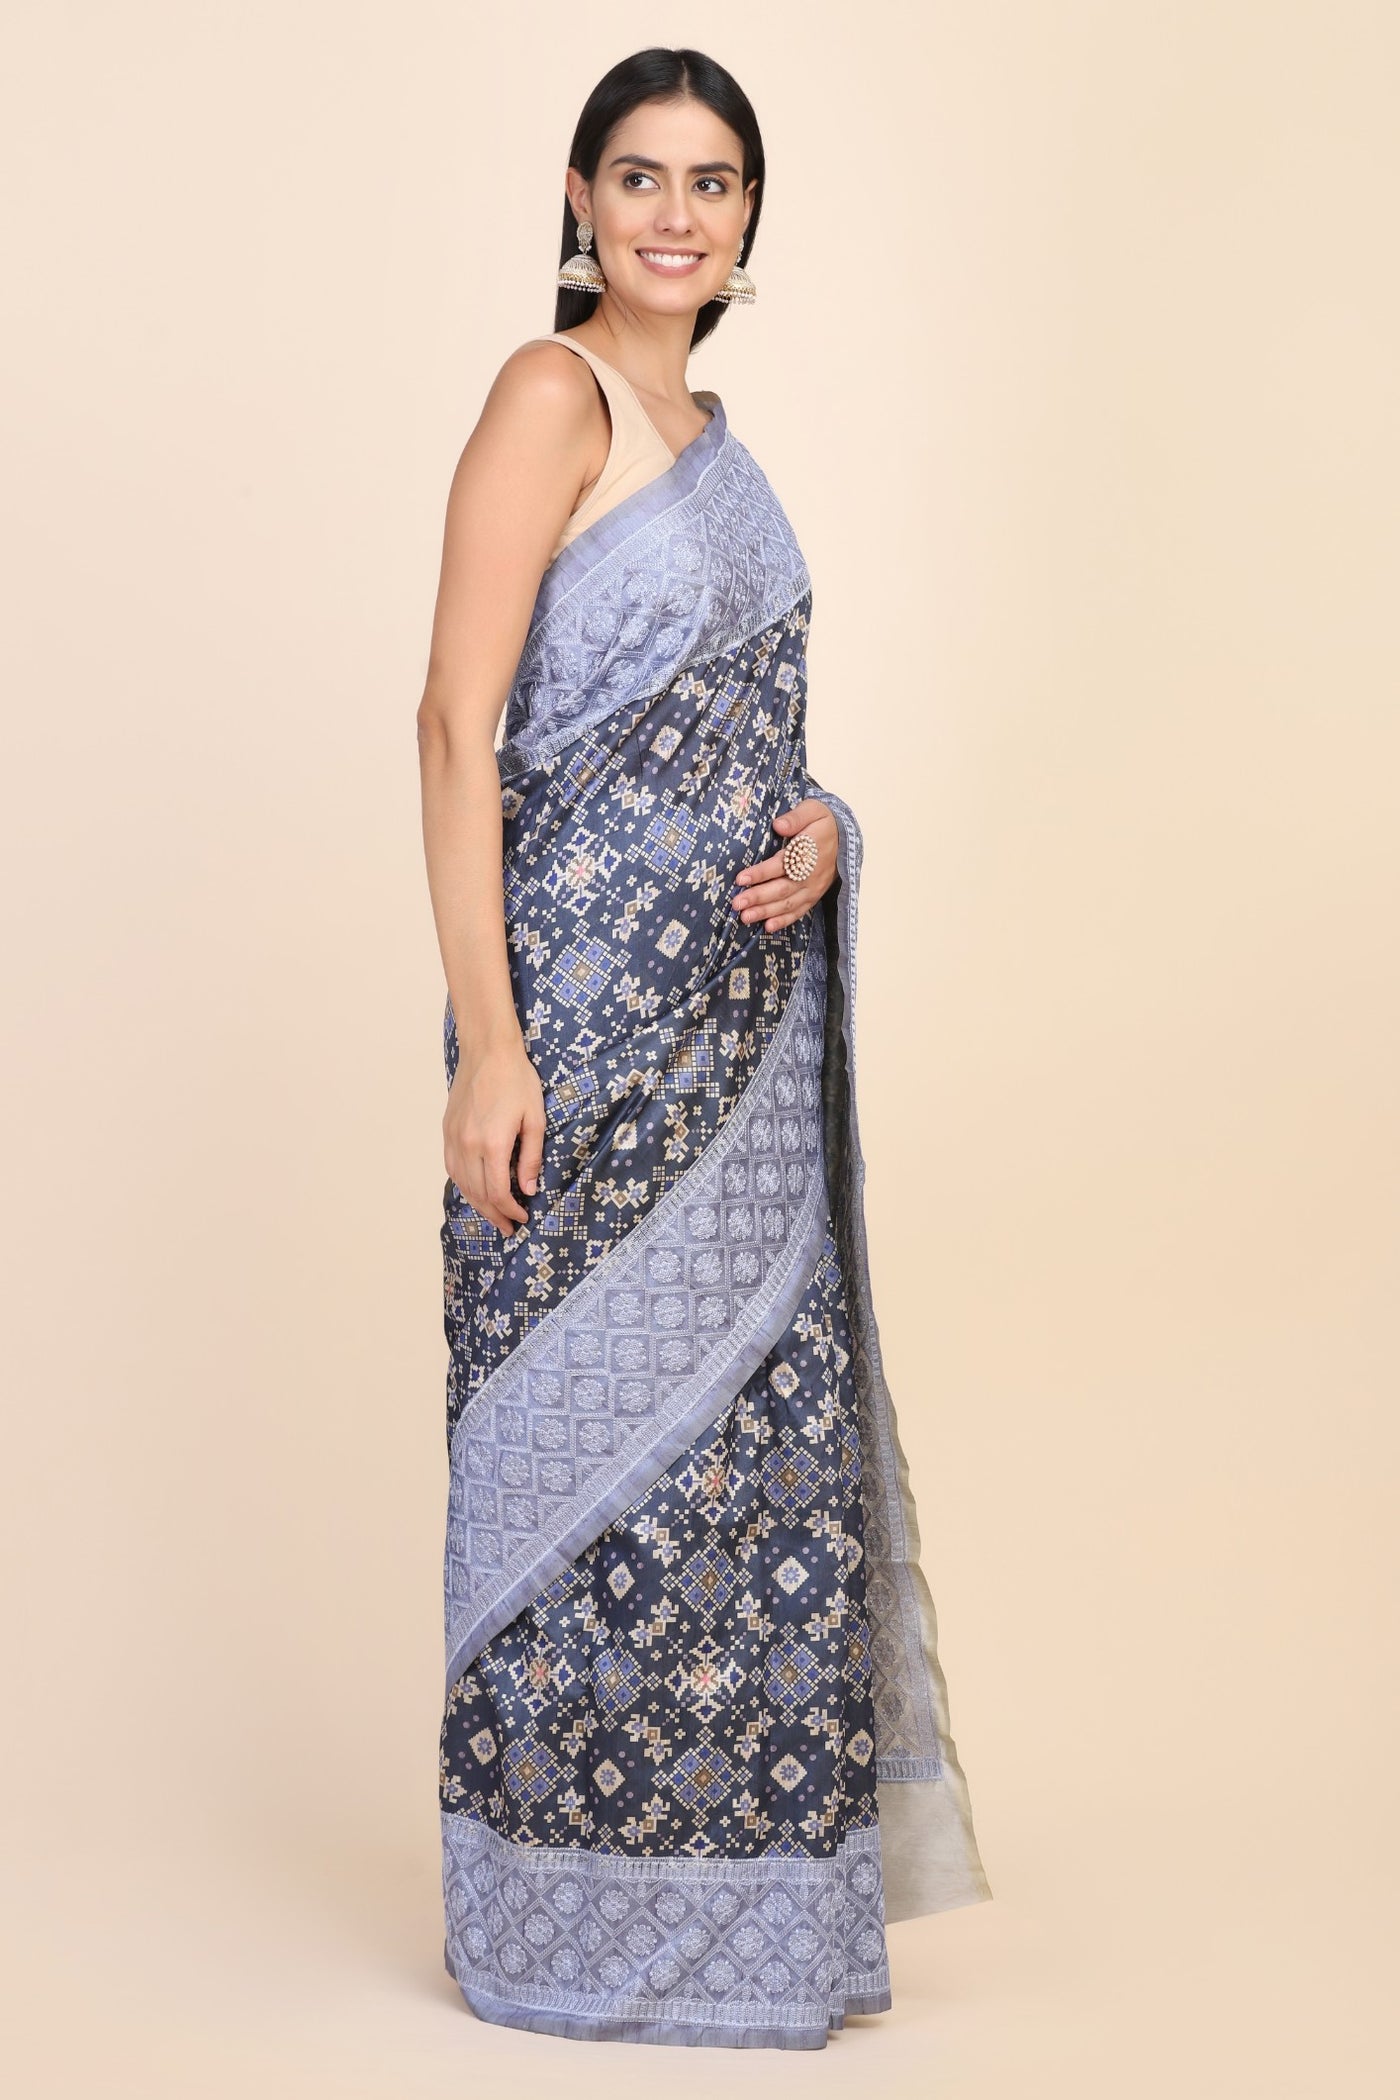 Classy blue color geometrical motif printed and embroidered saree